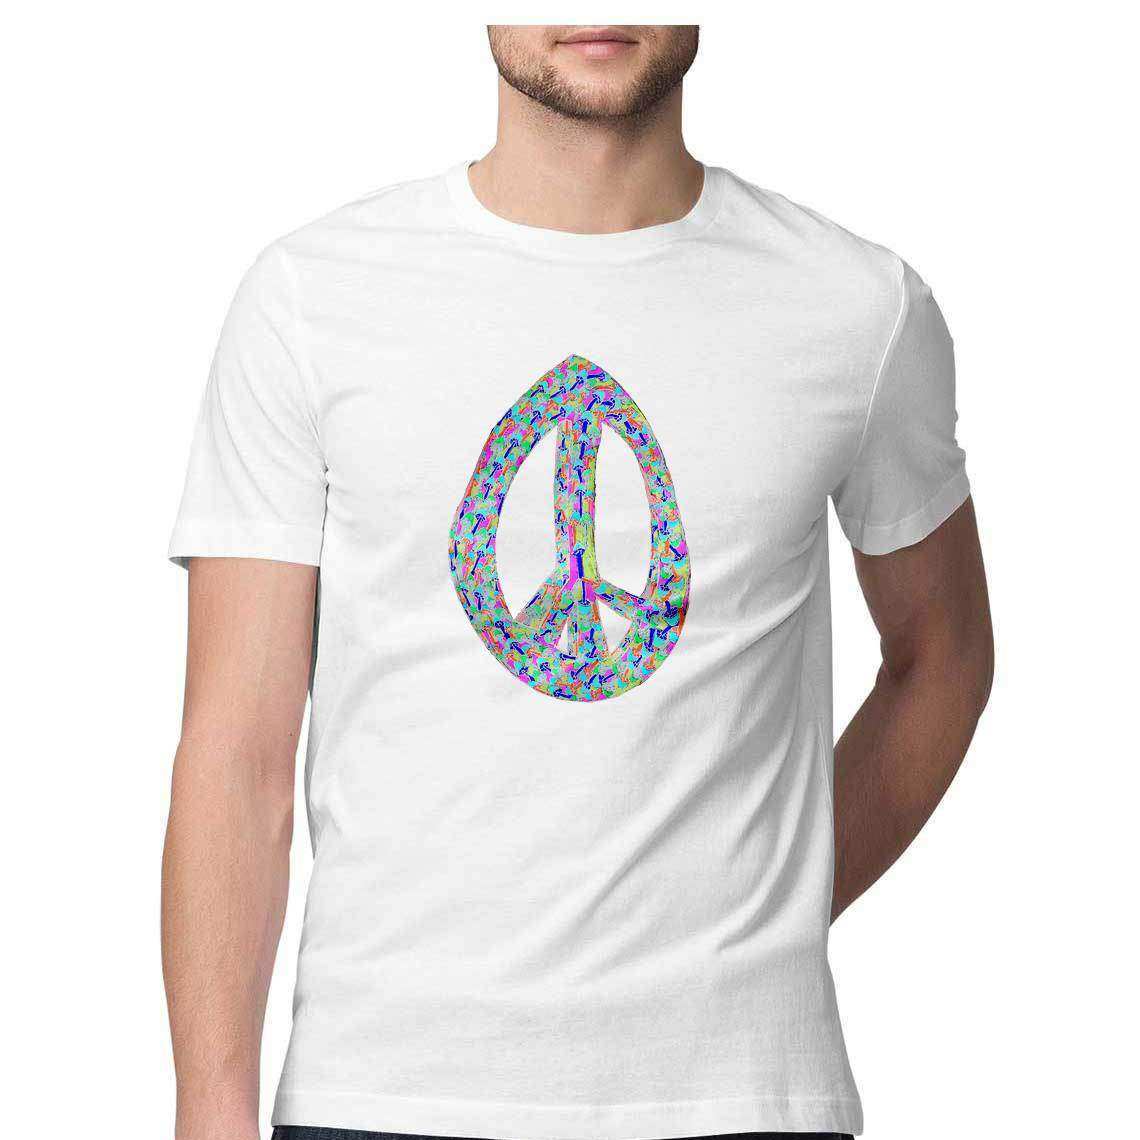 Colorfully Peaceful Graphic T-Shirt - CBD Store India